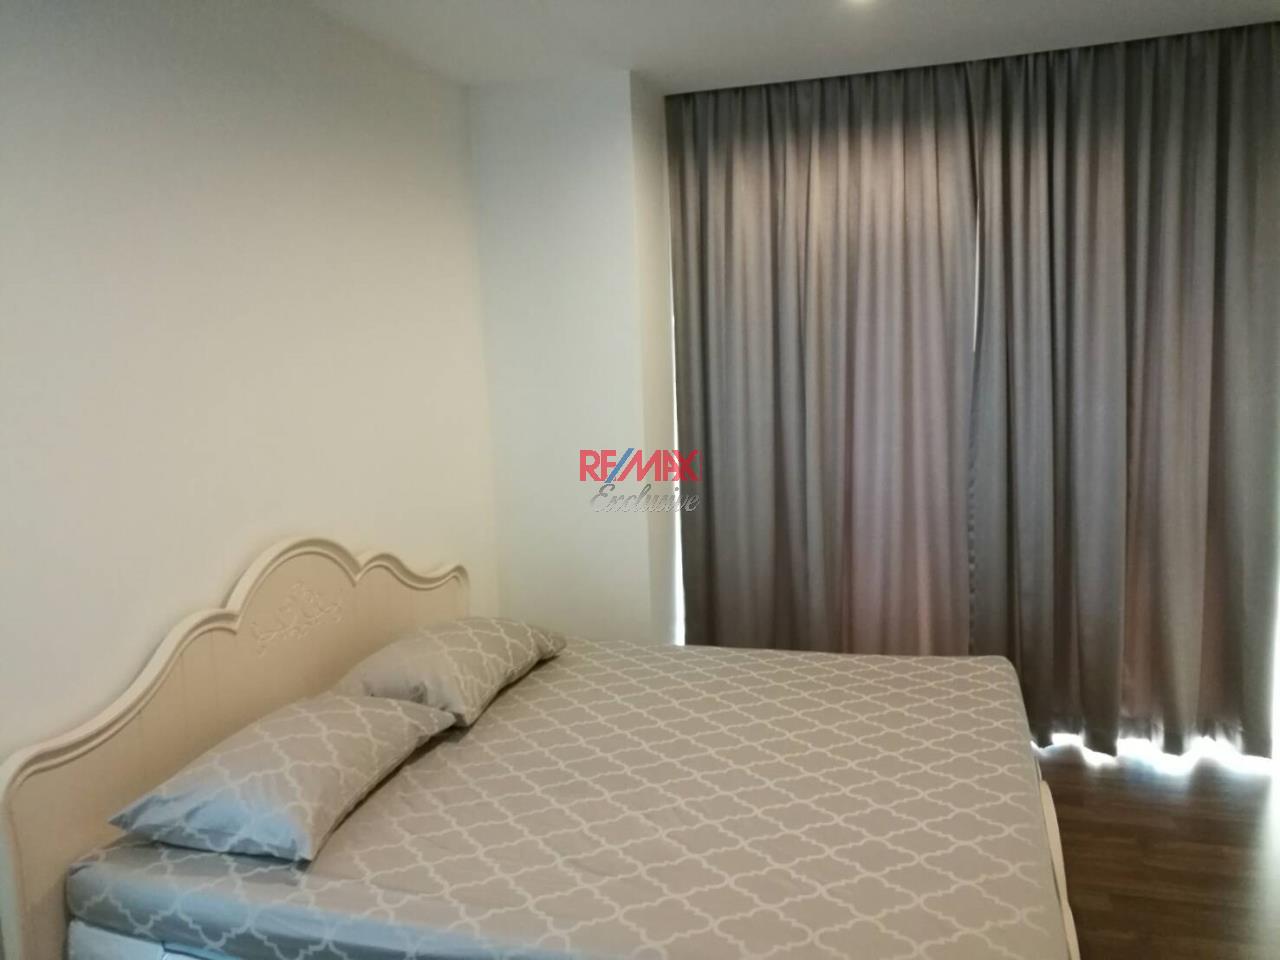 RE/MAX Exclusive Agency's The Room 62 1 bedroom for rent and sale 6